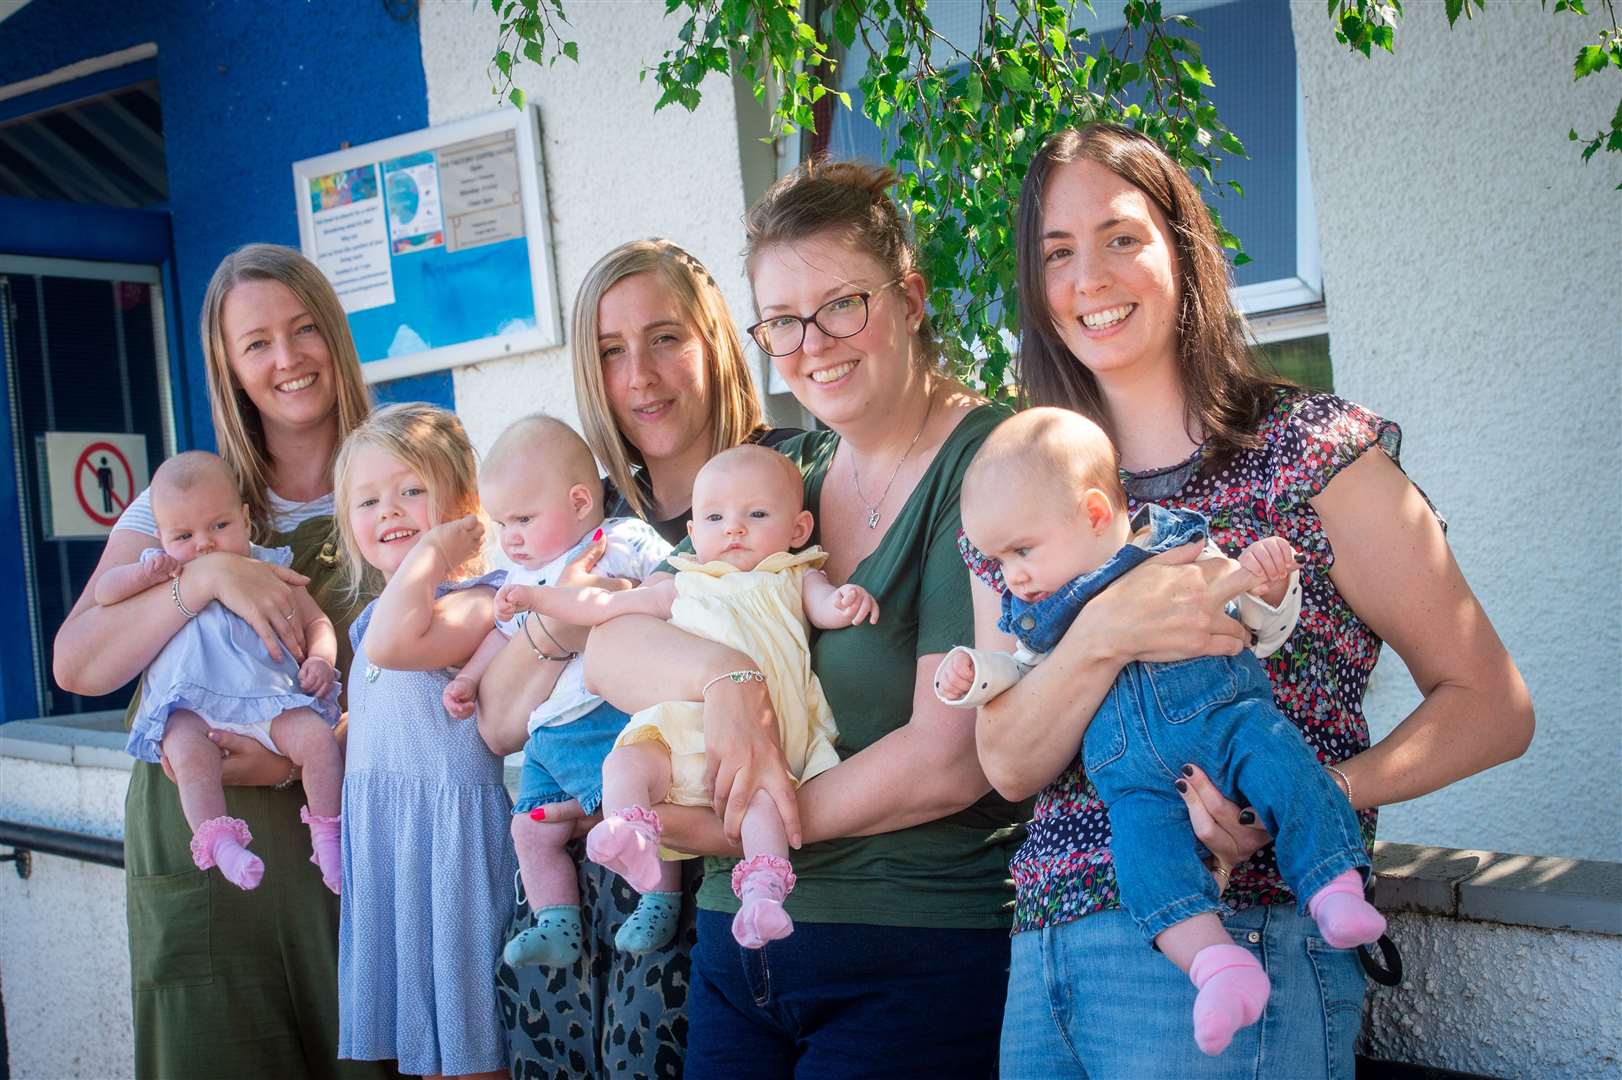 Midwife Natasha Niven has been doing antenatal education initiatives for pregnant women during lockdown. Caroline Riley with Hallie and Mila, Jen MacDonald and Andi, Odette Ashman and Charlette, Sarah Smith and Libby. Picture: Callum Mackay